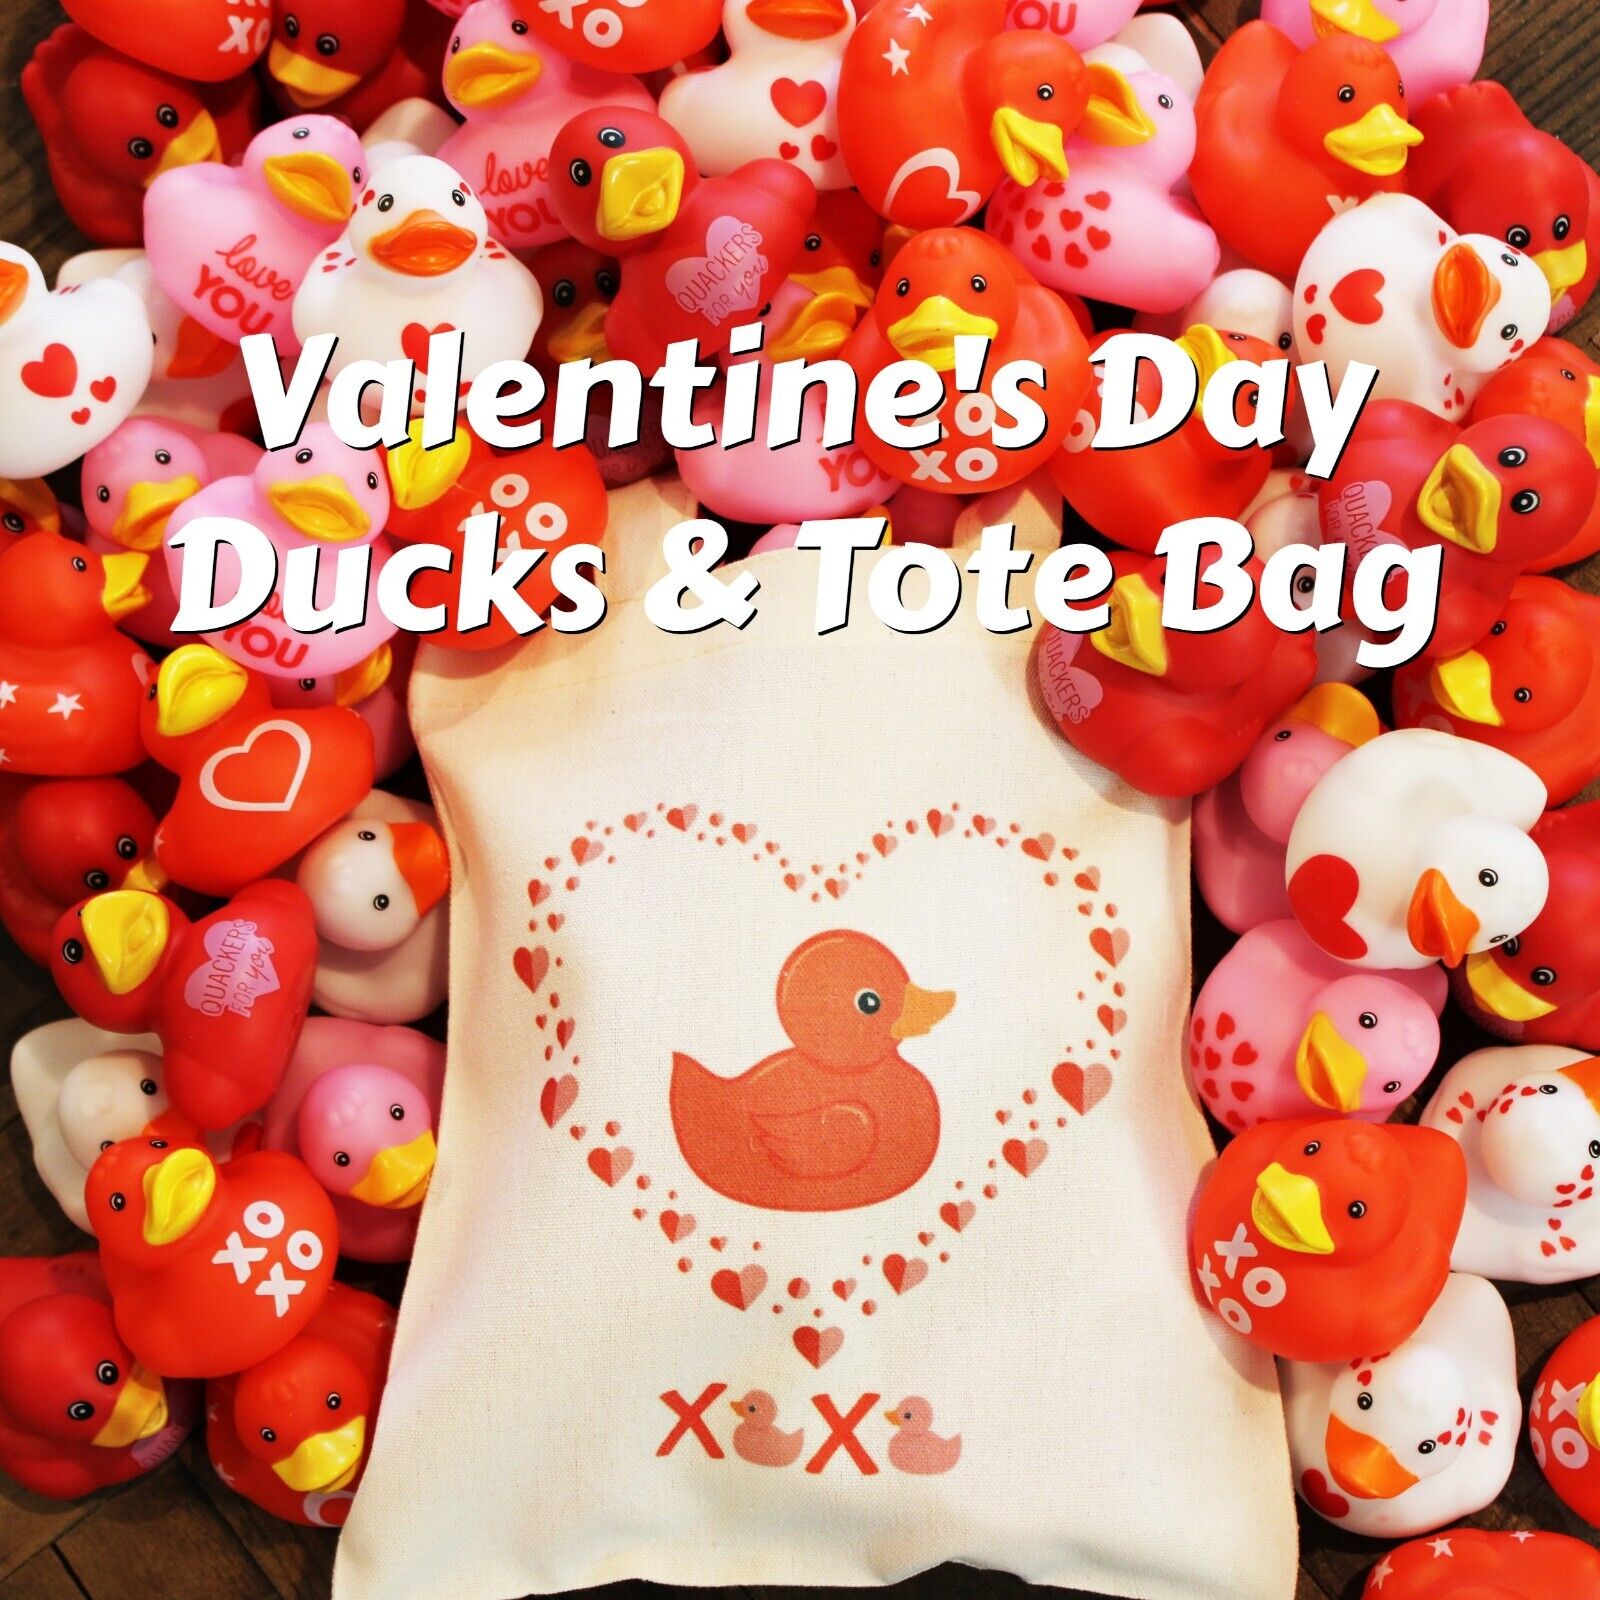 Valentine's Day Rubber Ducks & Tote Bag | Gift for Jeep Lovers | DuckDuckJeep